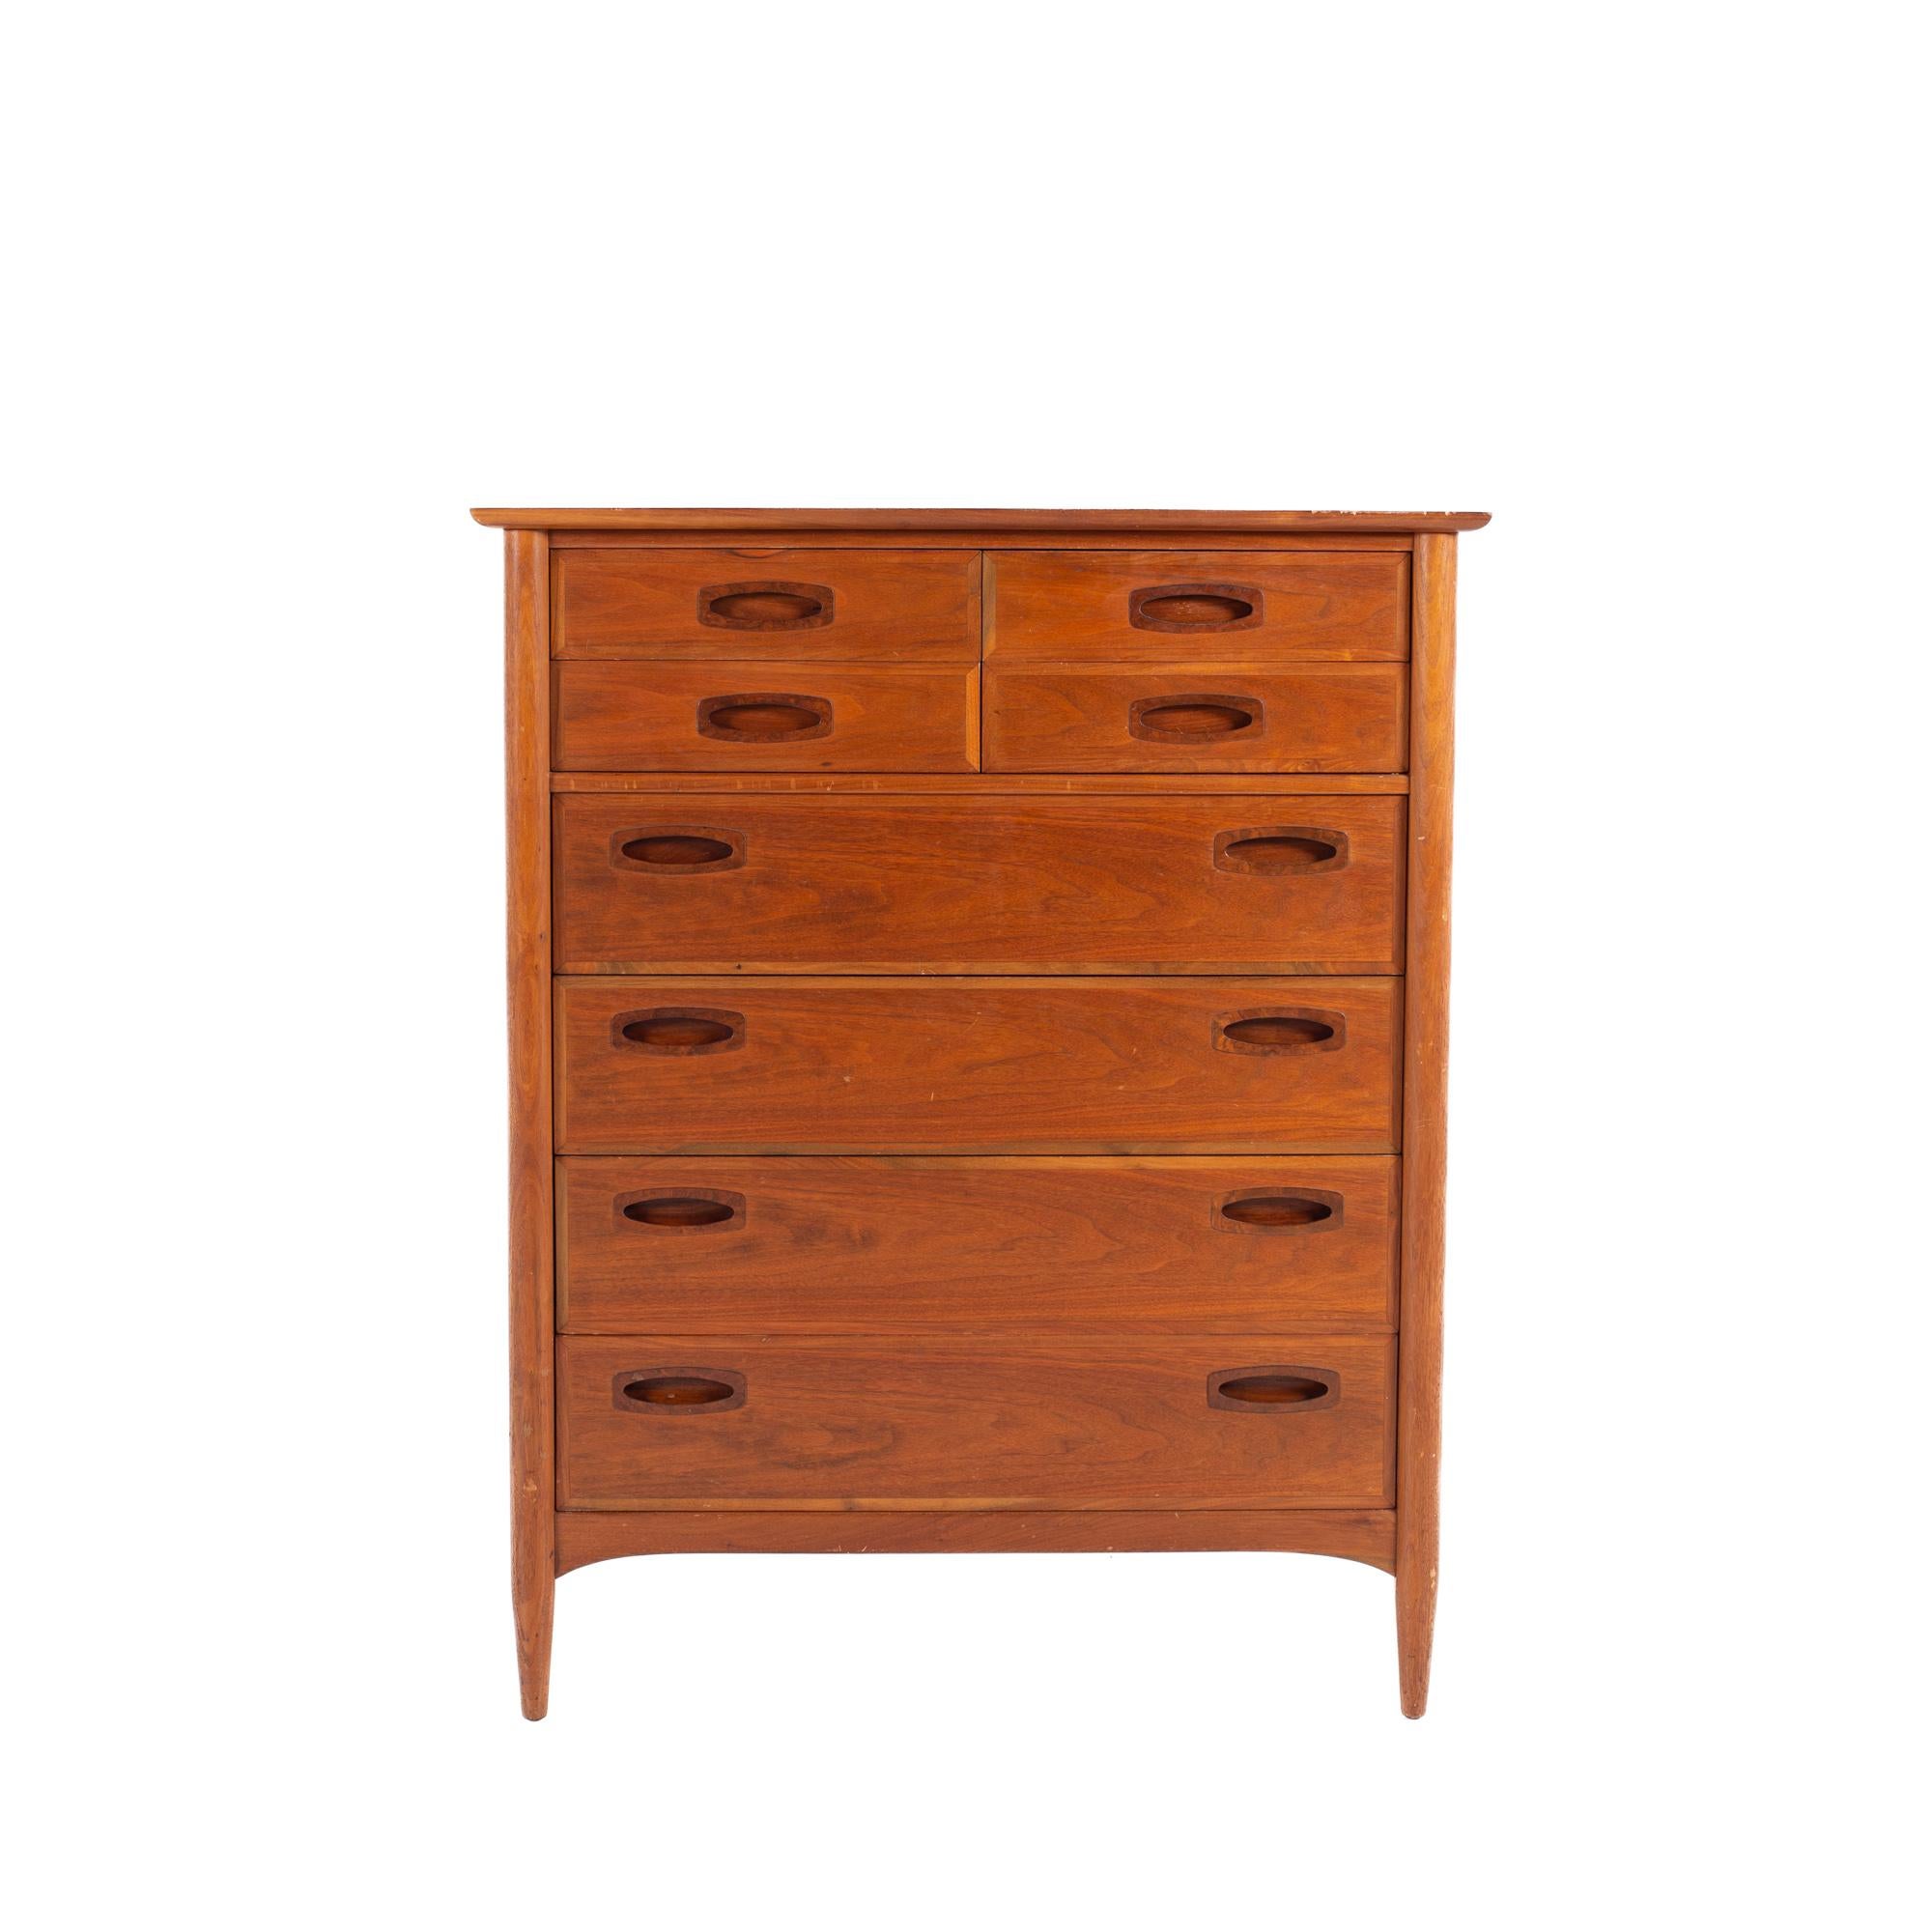 Mid-century walnut 8 drawer highboy dresser

The dresser measures: 38 wide x 20 deep x 47 inches high

All pieces of furniture can be had in what we call restored vintage condition. That means the piece is restored upon purchase so it’s free of